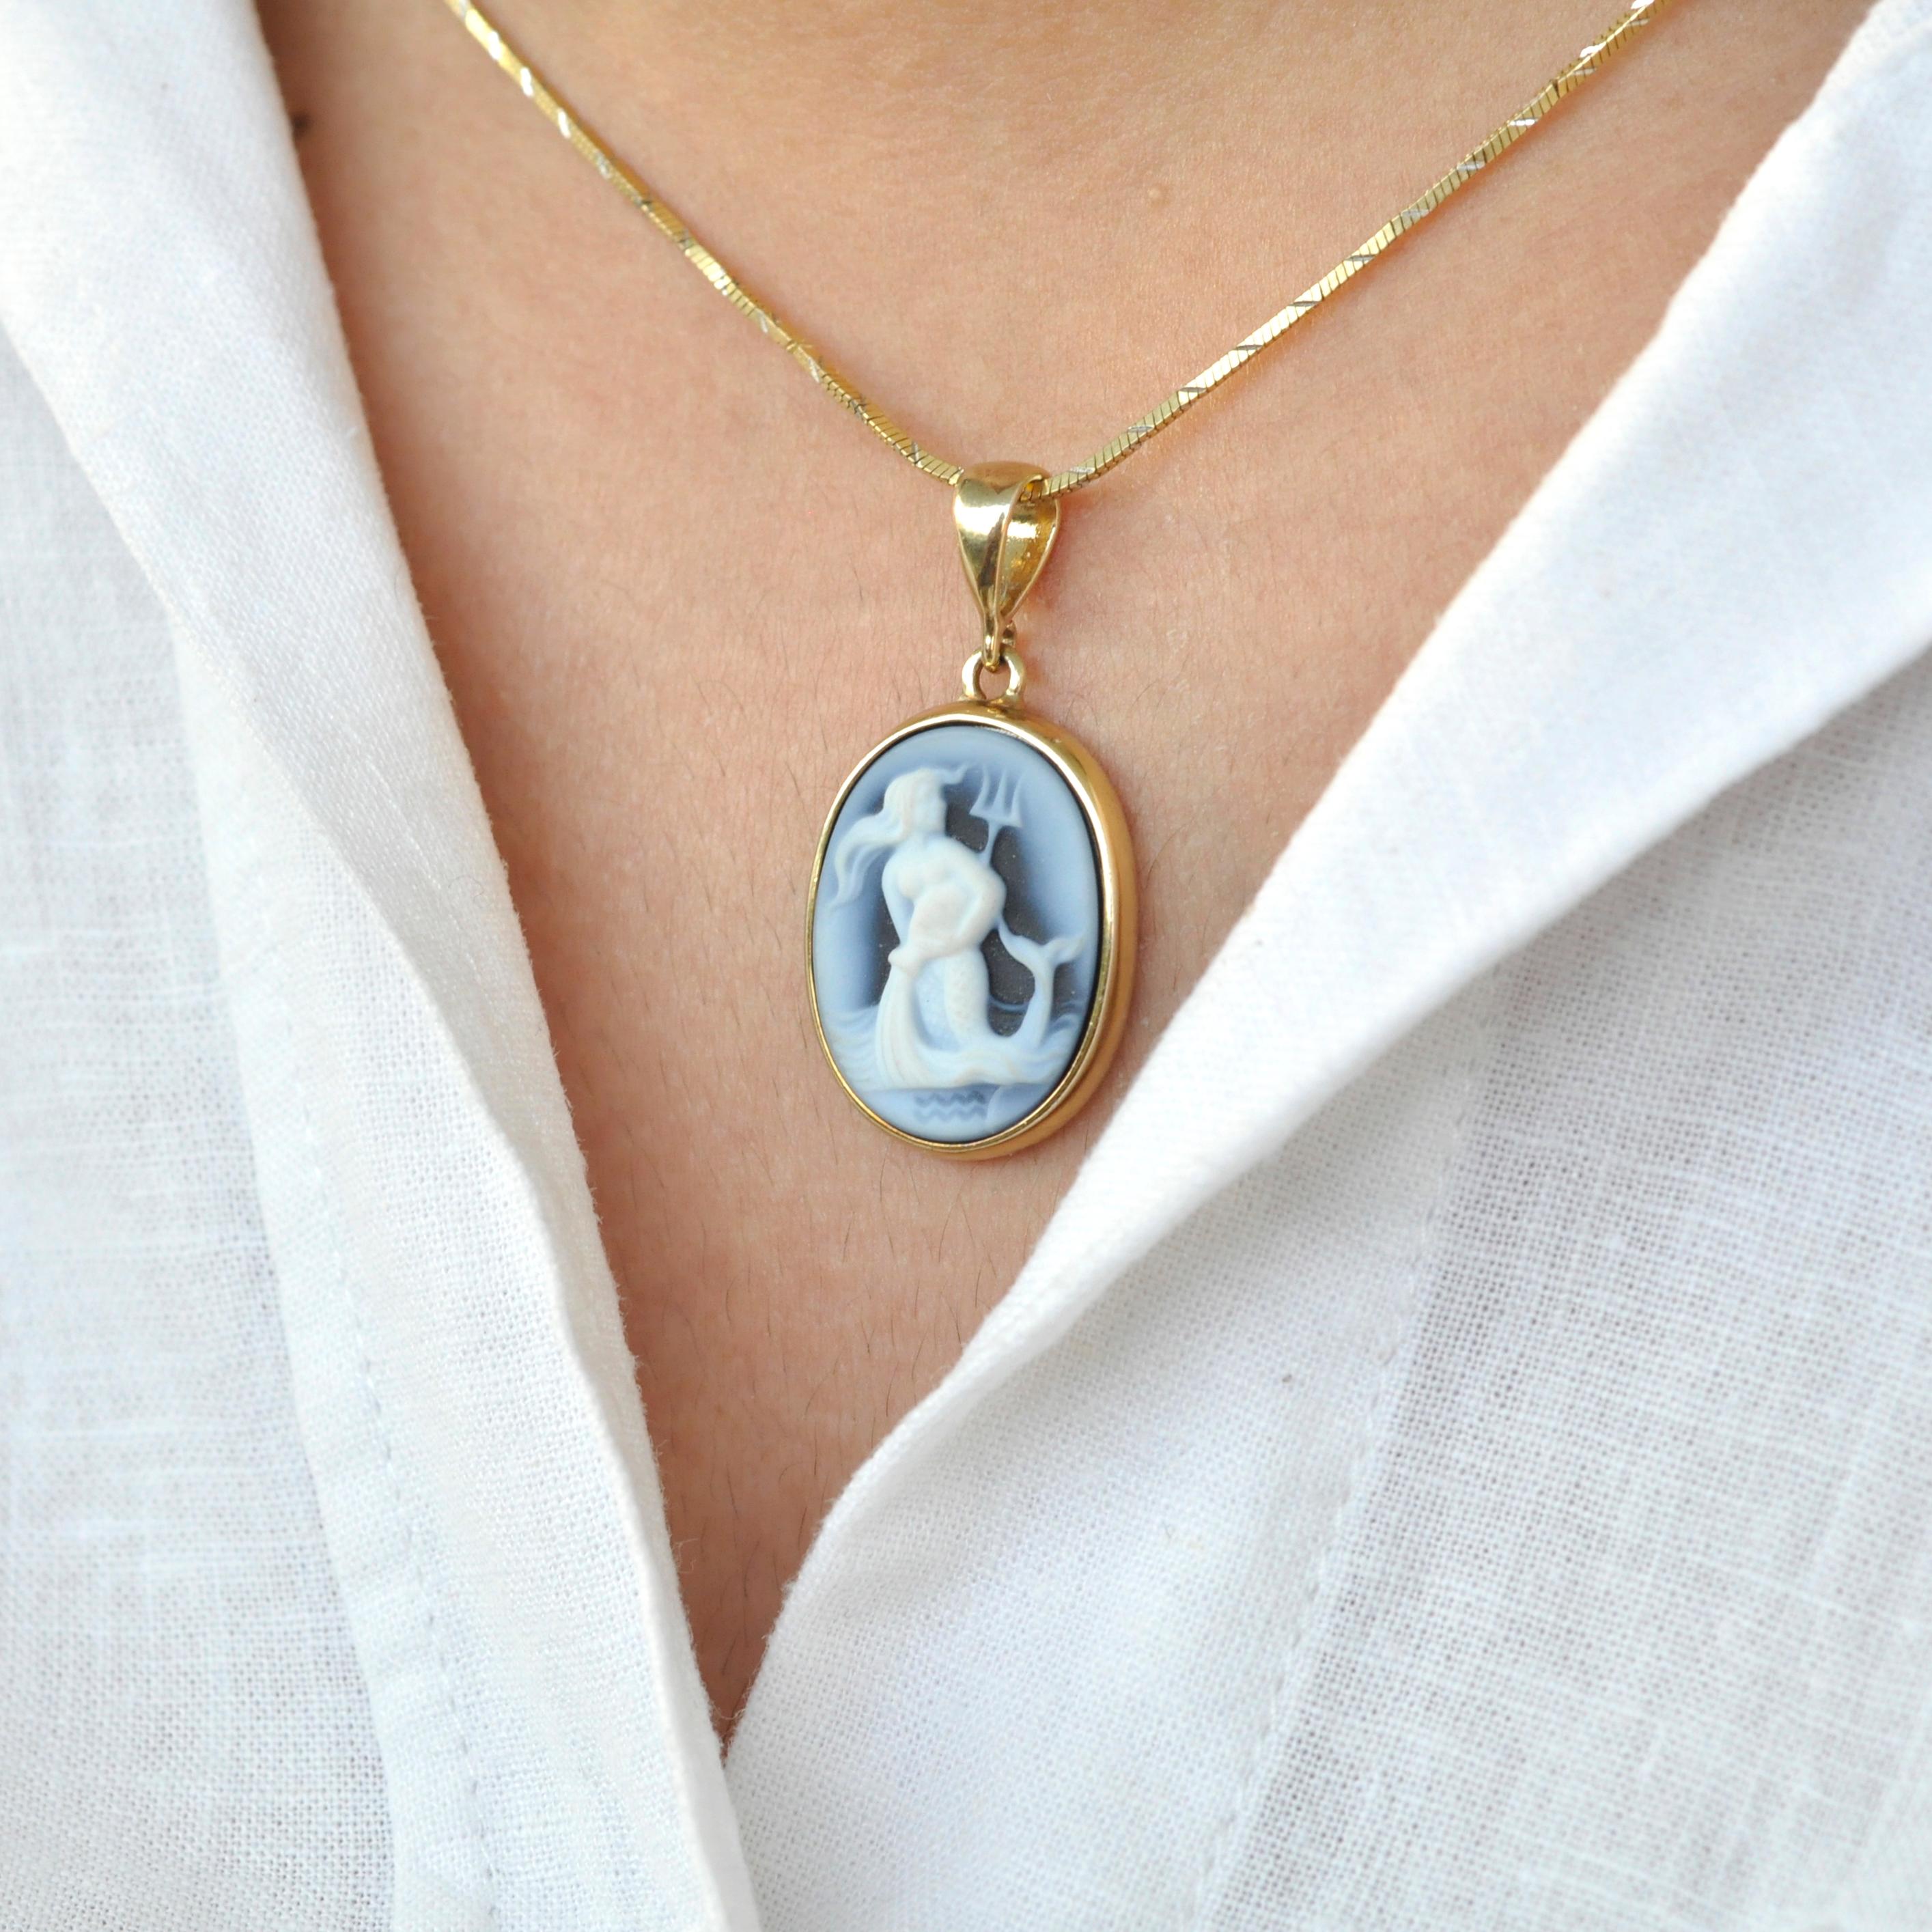 Here's our aquarius zodiac carving cameo pendant necklace from the zodiac collection. The Cameo is made in Germany by an expert Cameo engraver on the relief of 100% natural agate rock from brazil (a variety of chalcedony). The pendant is set in 925